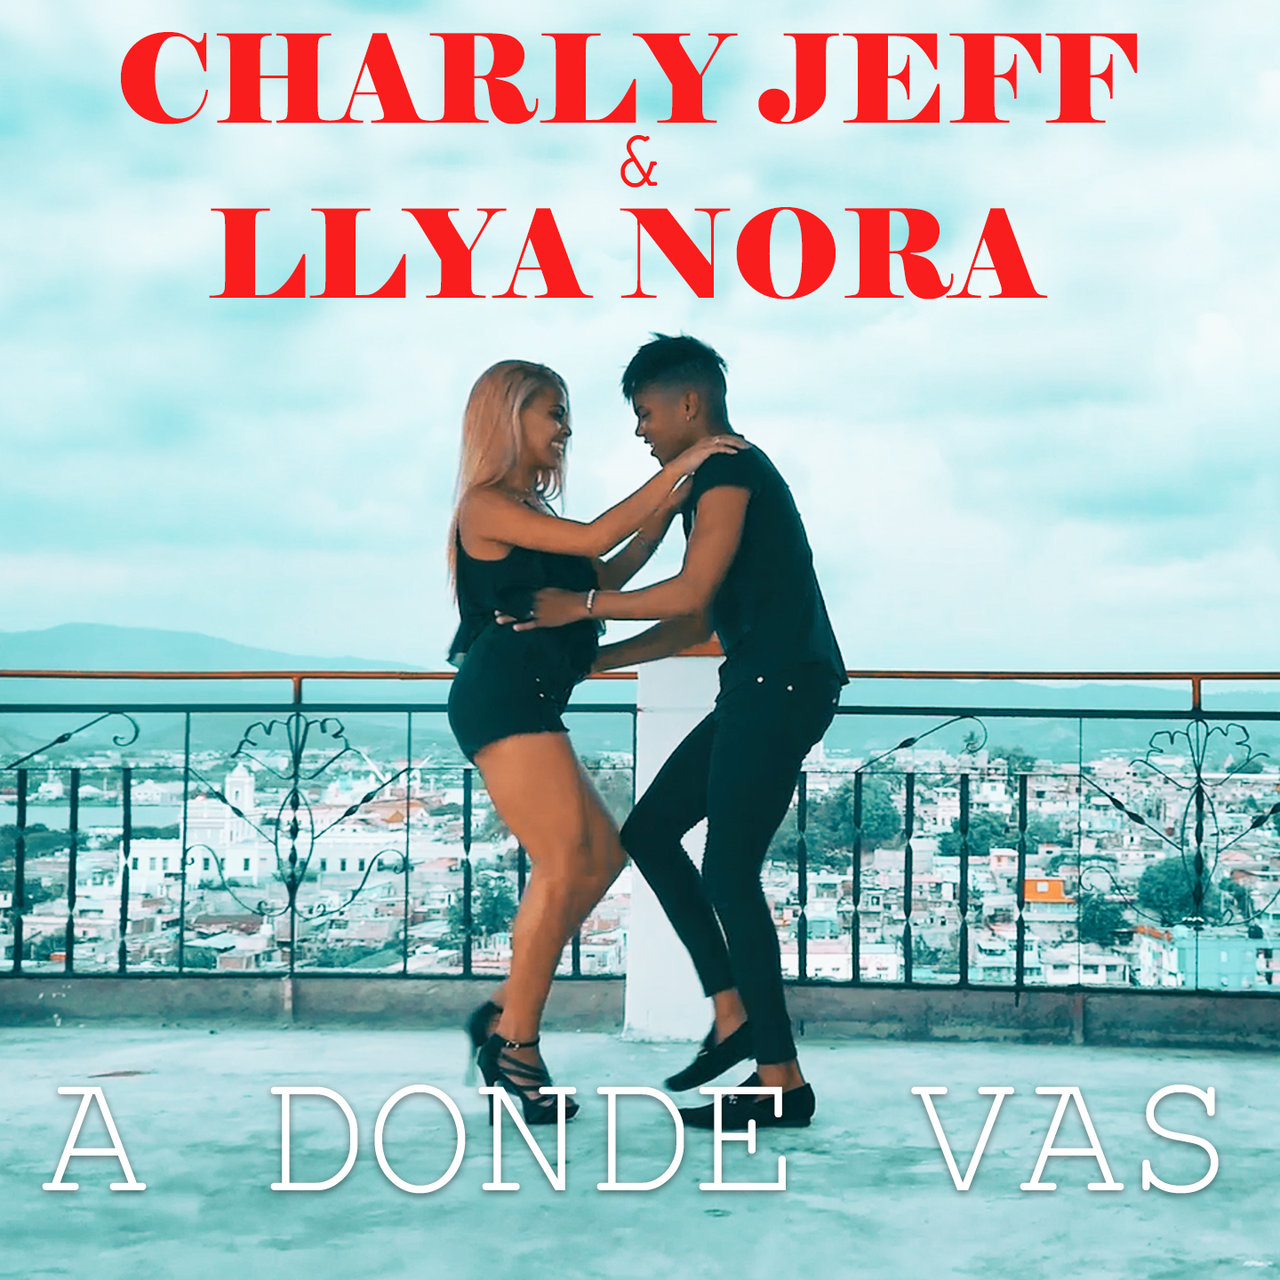 Charly Jeff - A Donde Vas (ft. Llya Nora) (Cover)